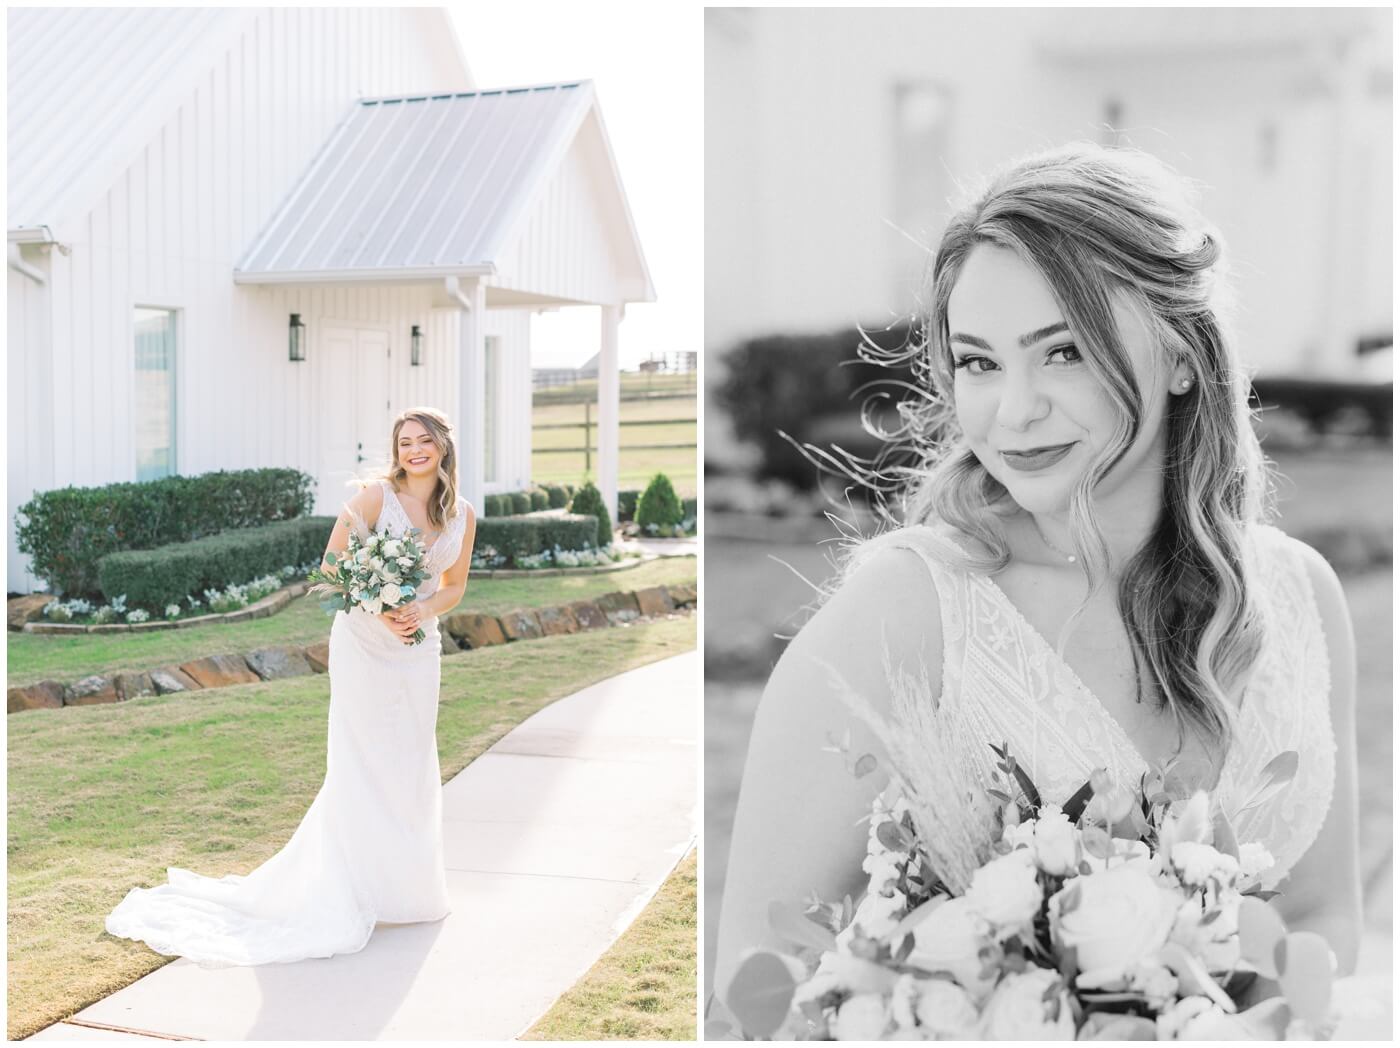 Texas farmhouse wedding | the bride smiles with her bouquet in front of the white farmhouse chapel